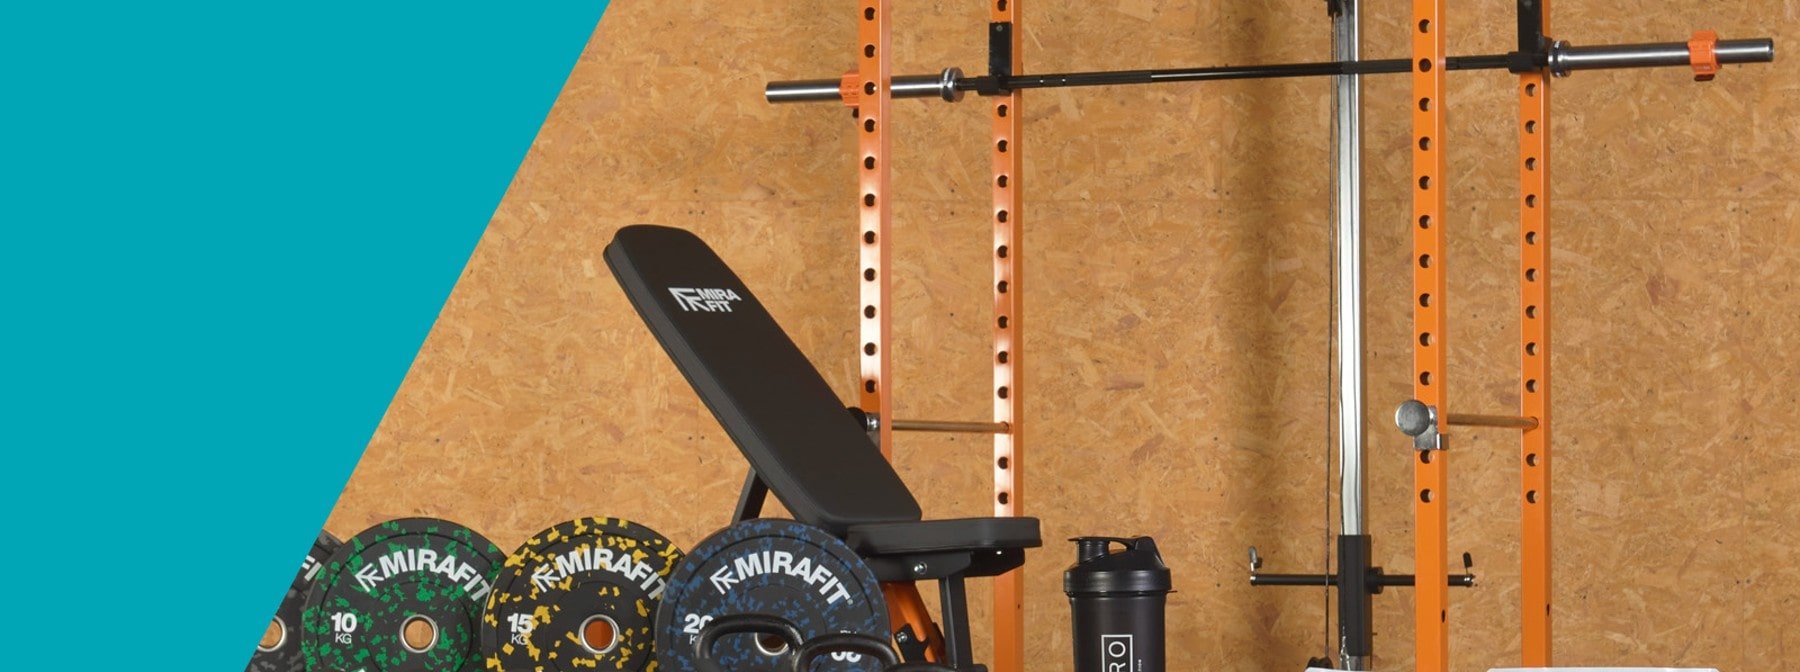 Win The Ultimate Home Gym Setup With Mirafit